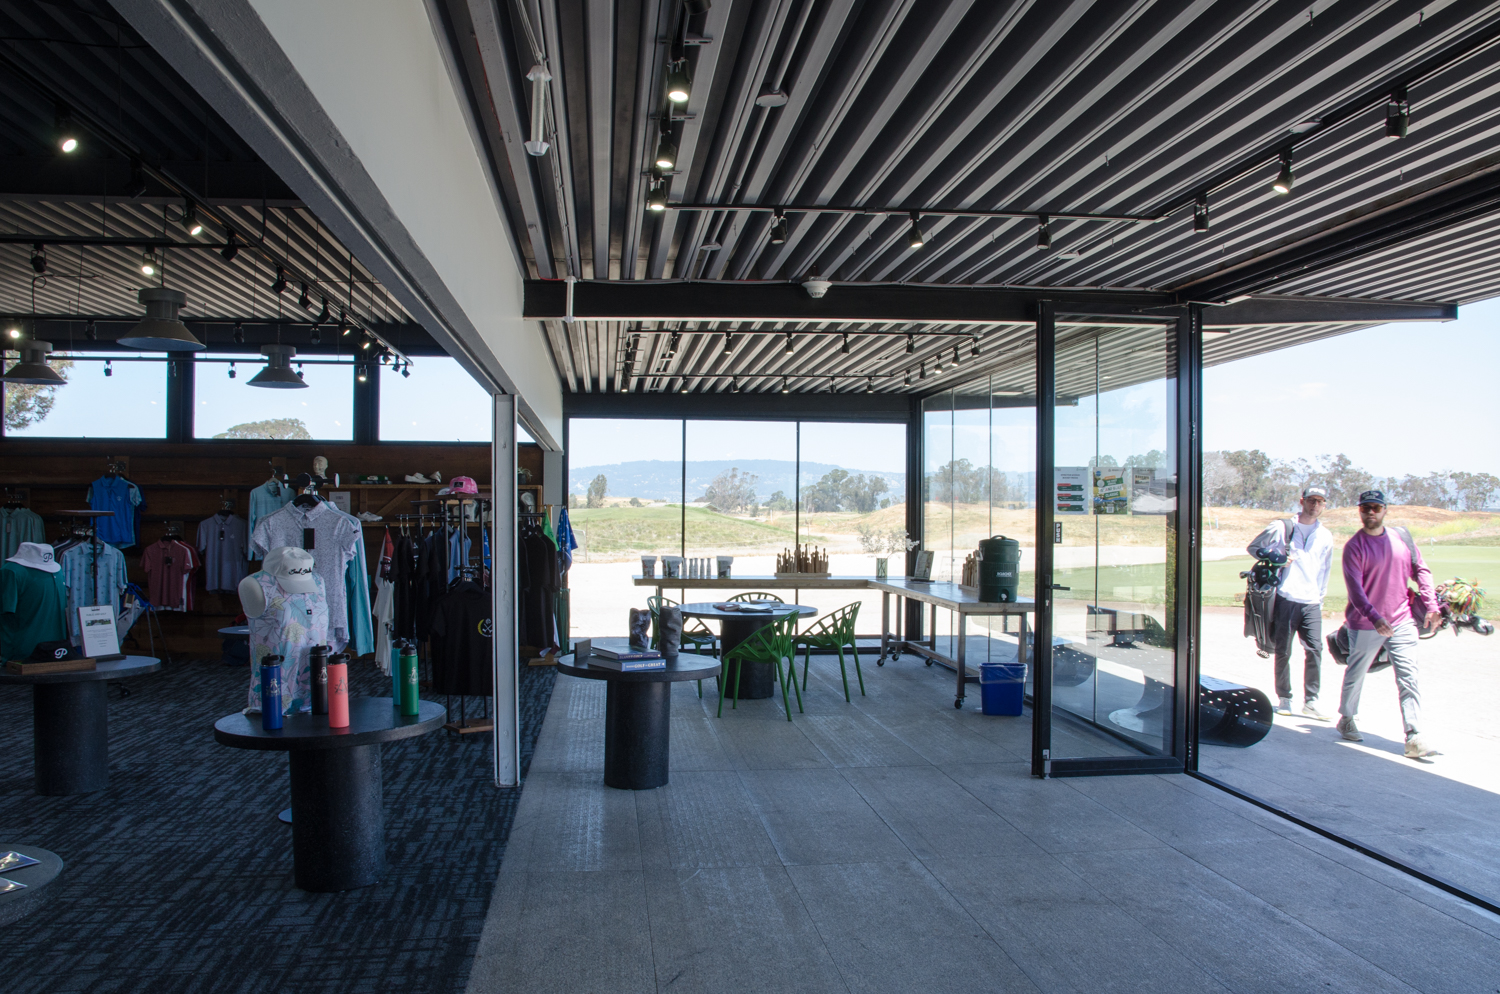 Corica Park golf shop and clubhouse interior